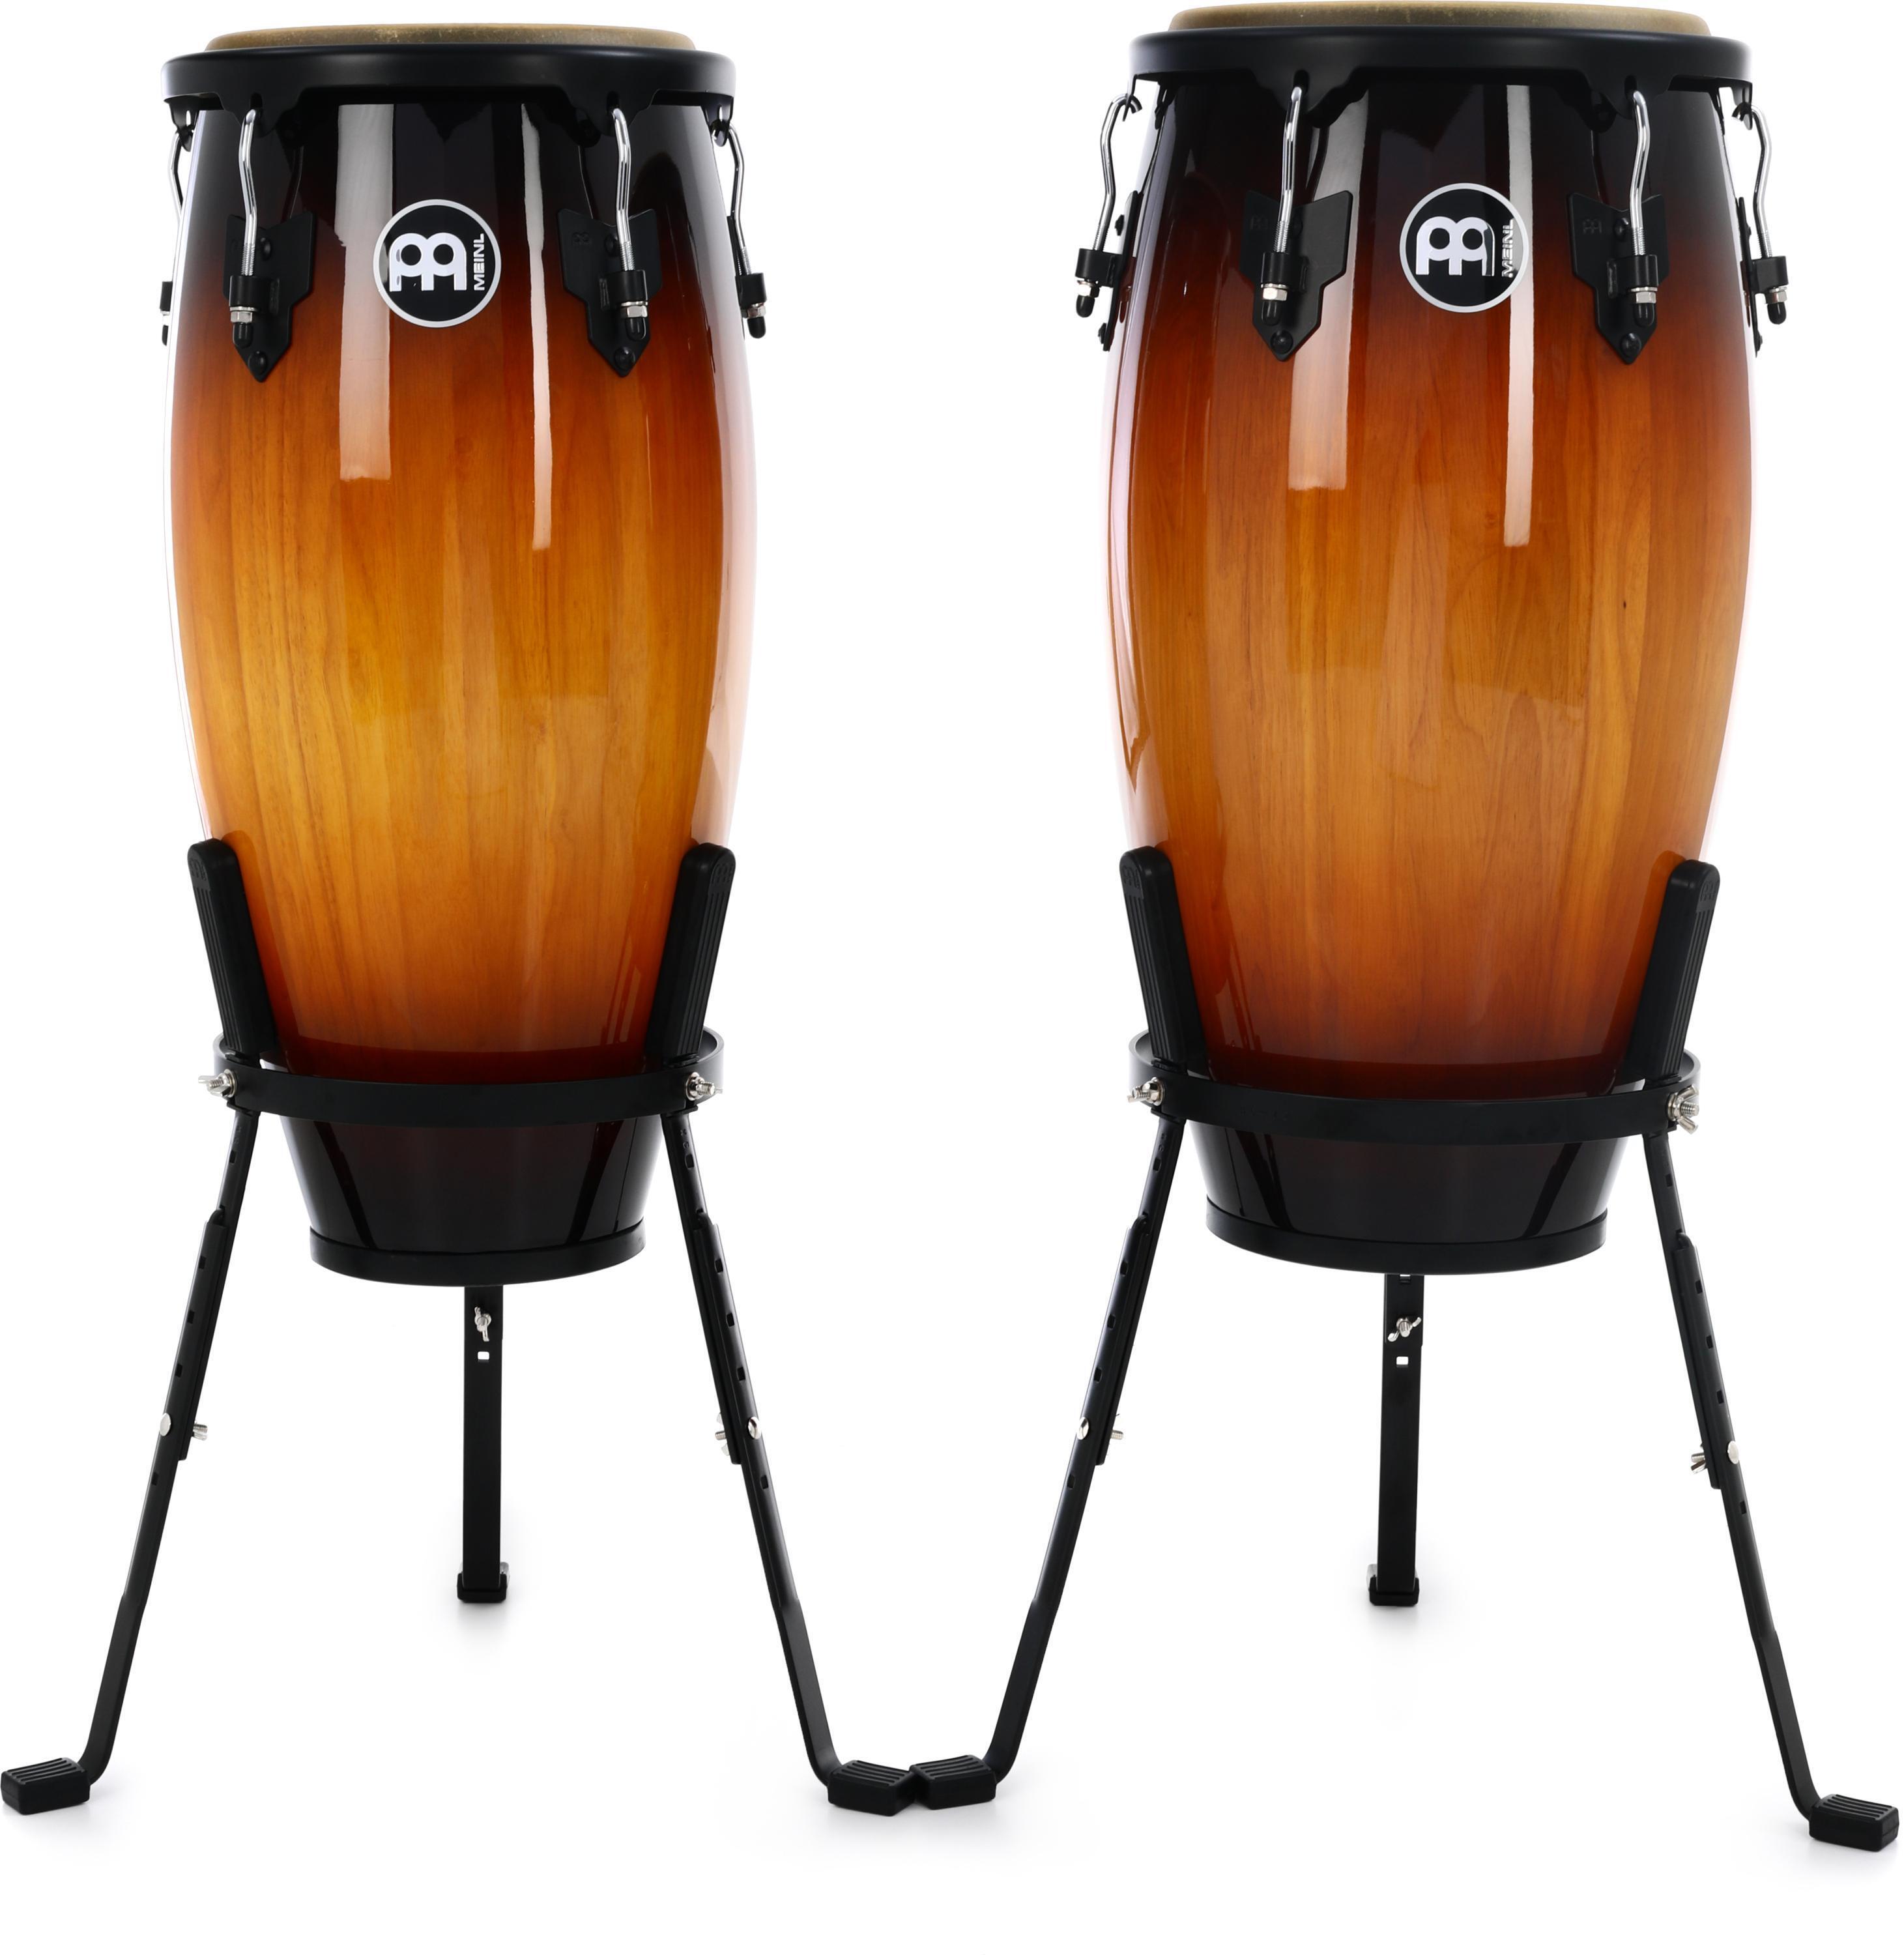 Meinl Percussion Headliner Series Conga Set with Basket Stands - 11/12 inch  Vintage Sunburst